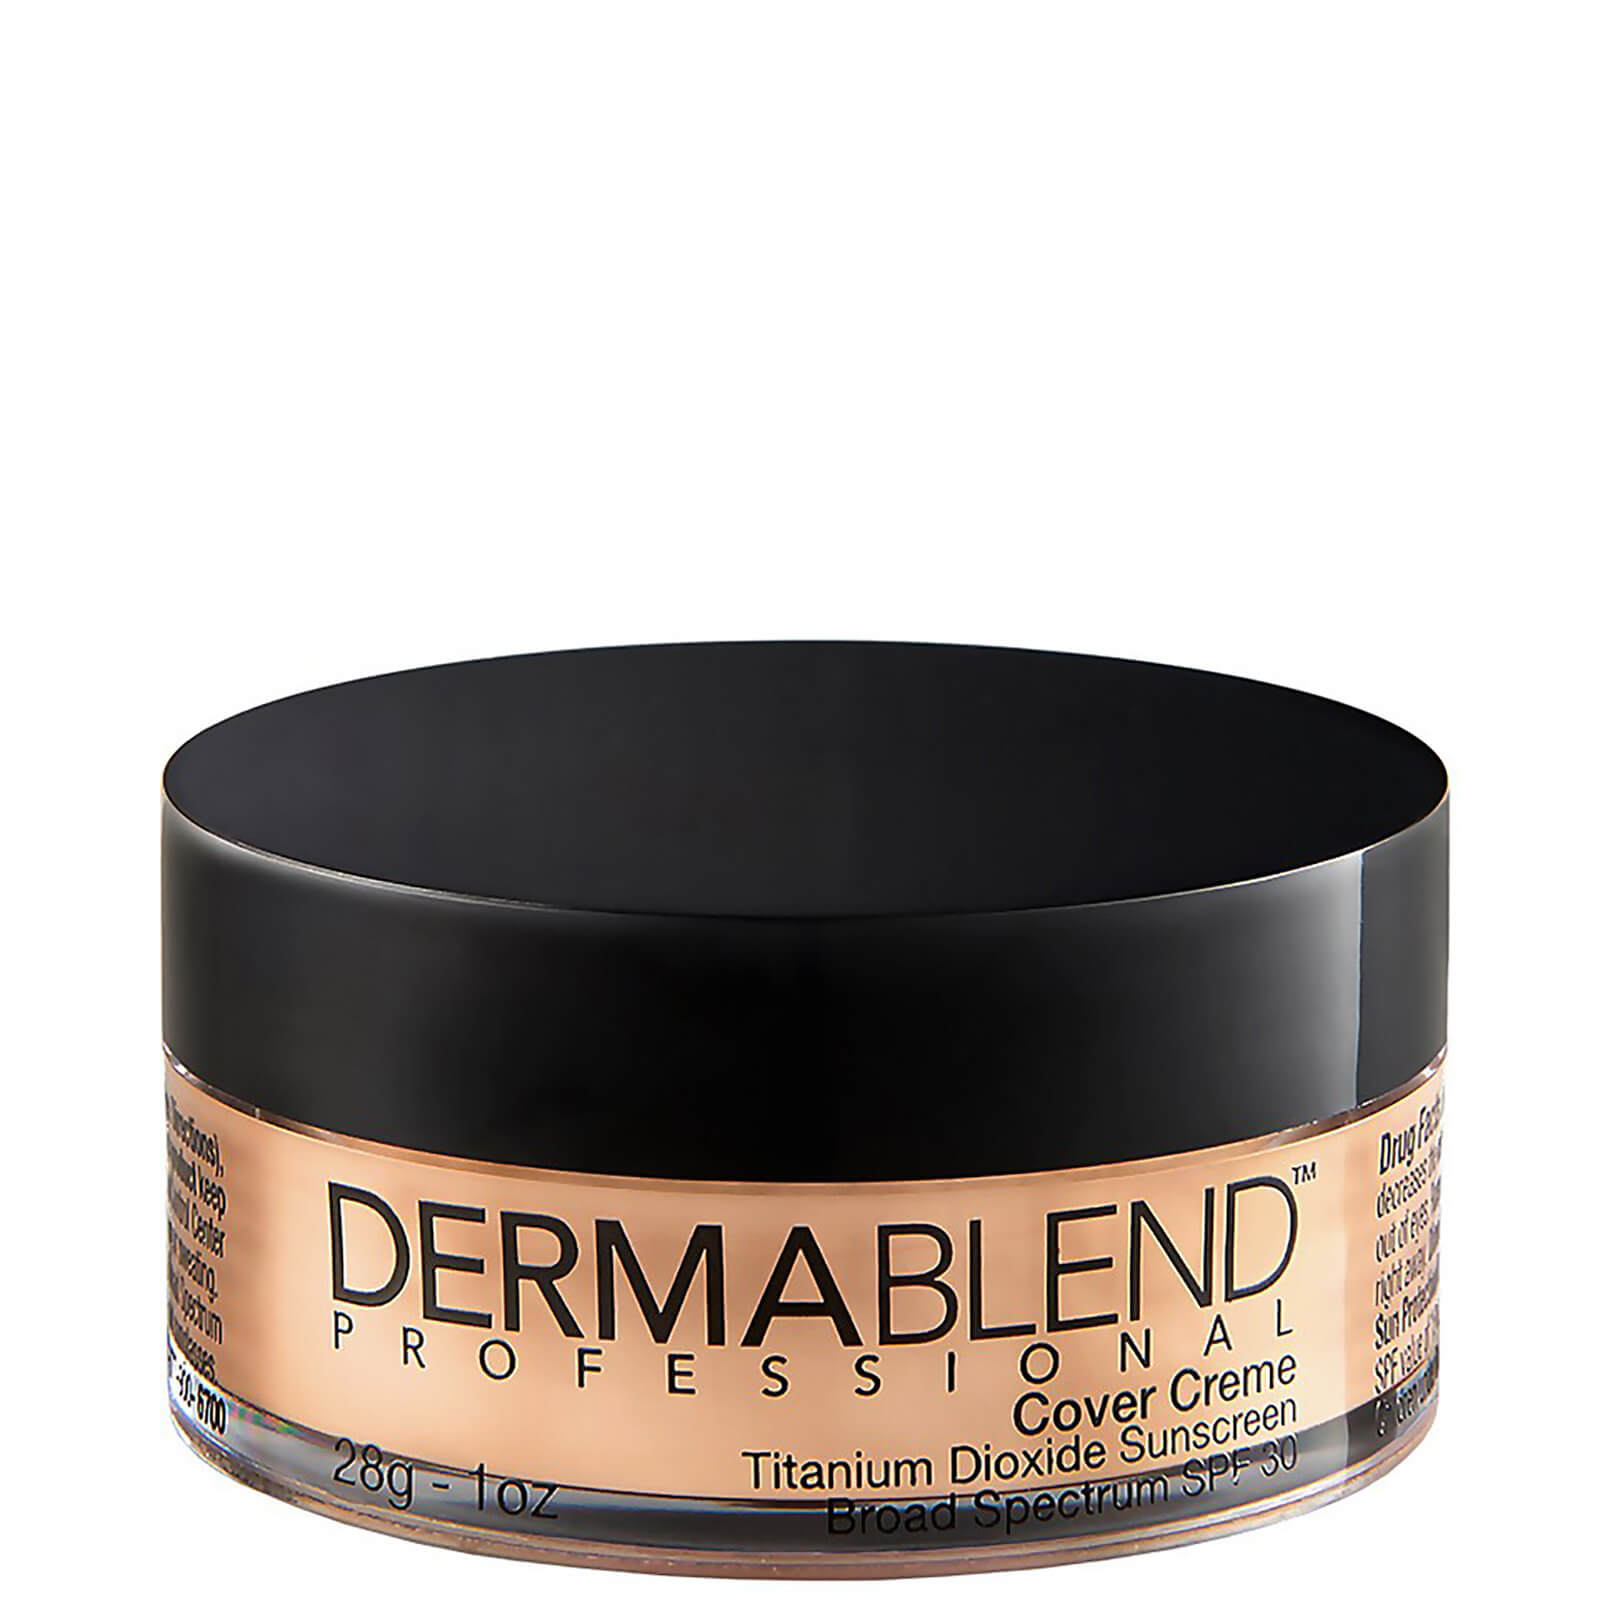 Dermablend Cover Creme Full Coverage Foundation With Spf 30 (1 Oz.) In 20w Cashew Beige